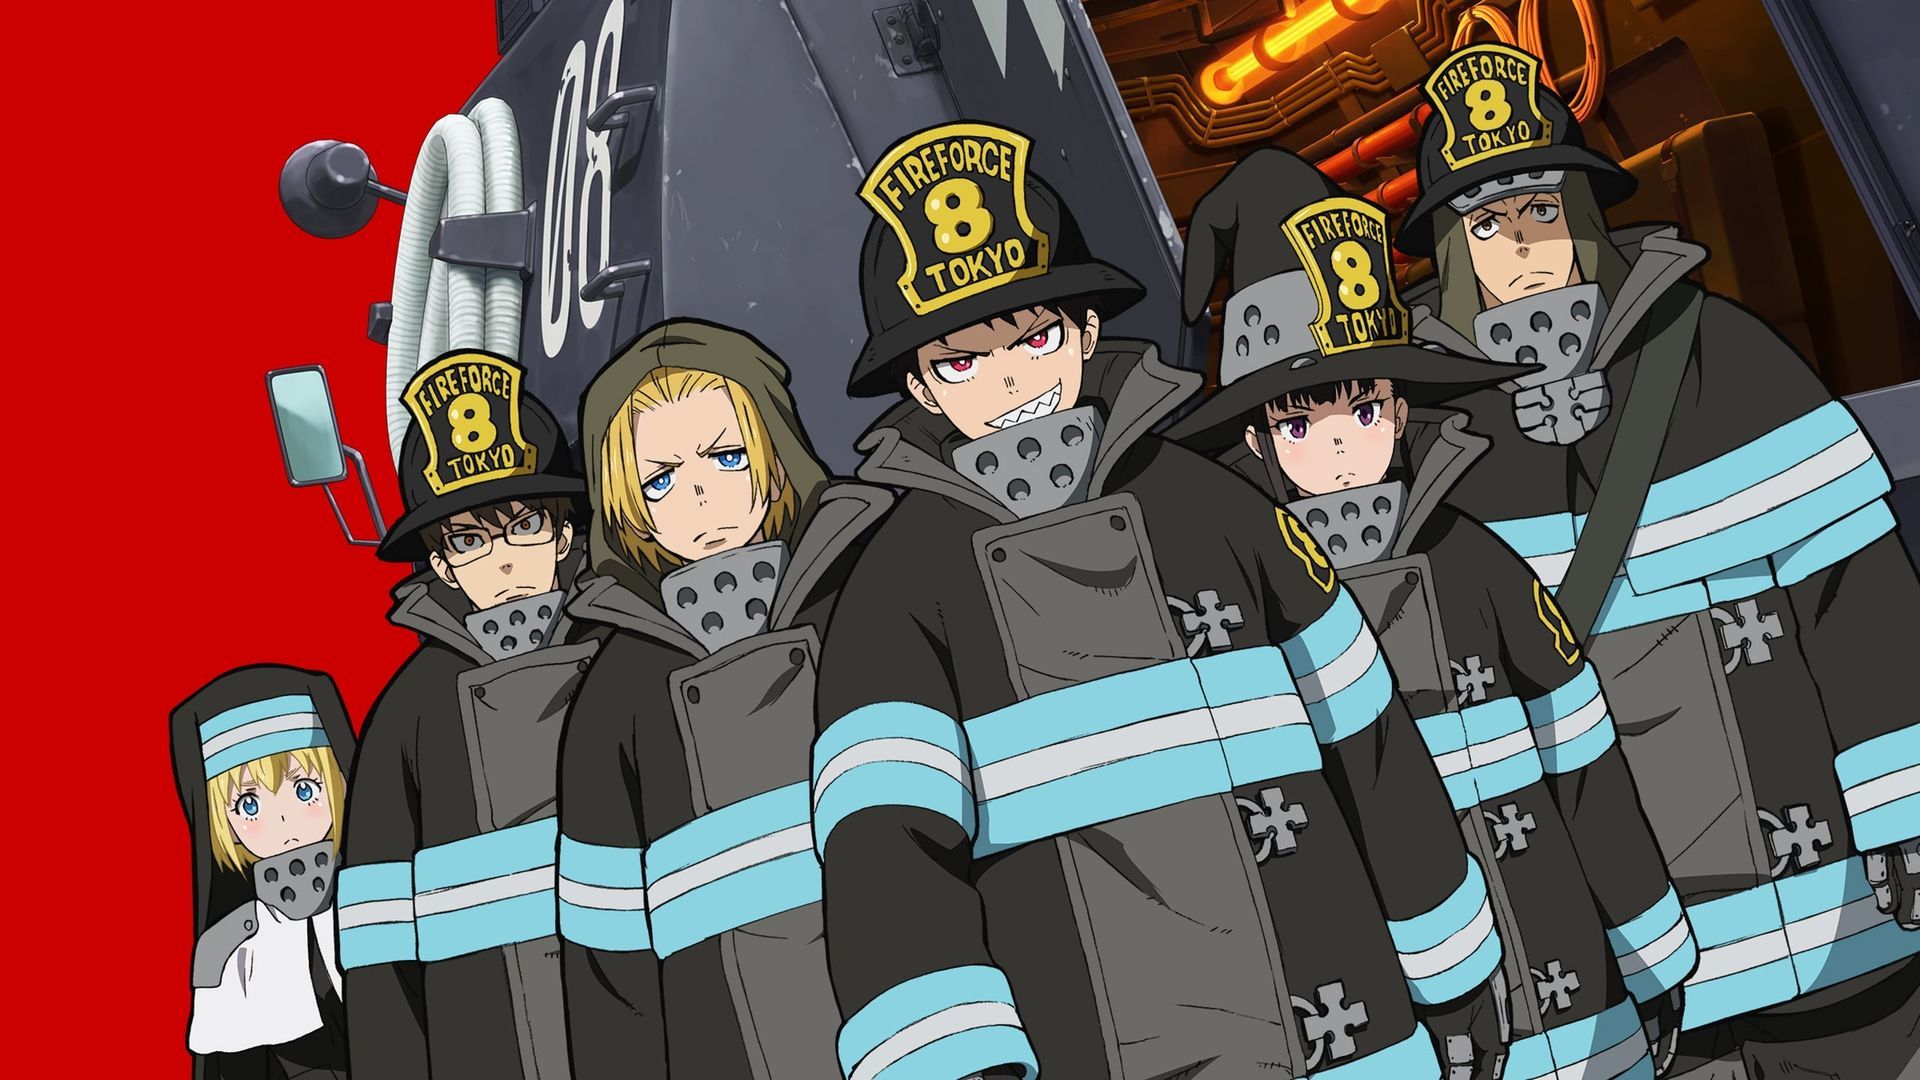 Watch Fire Force Episode 10 Online - The Promise